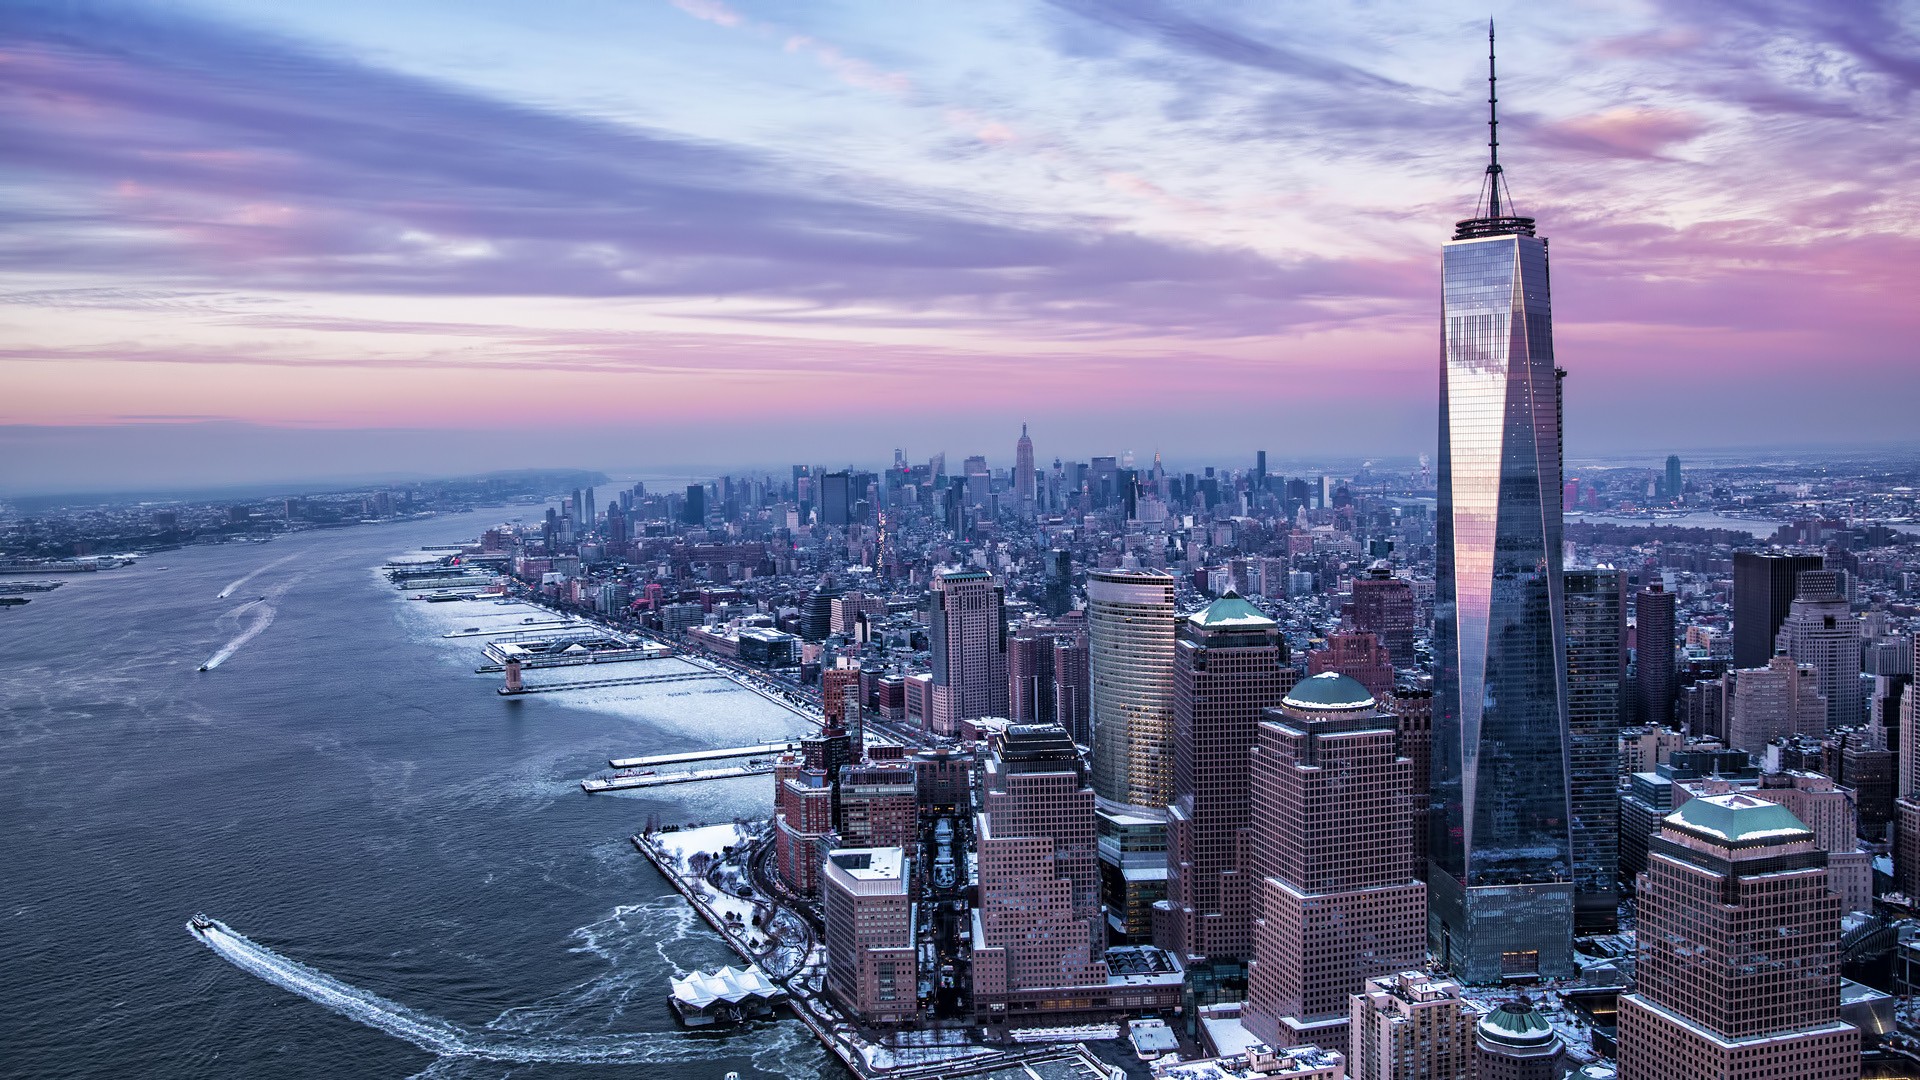 General 1920x1080 New York City city USA Freedom Tower Manhattan Hudson River winter river One World Trade Center architecture building skyscraper cityscape sunset clouds ship snow